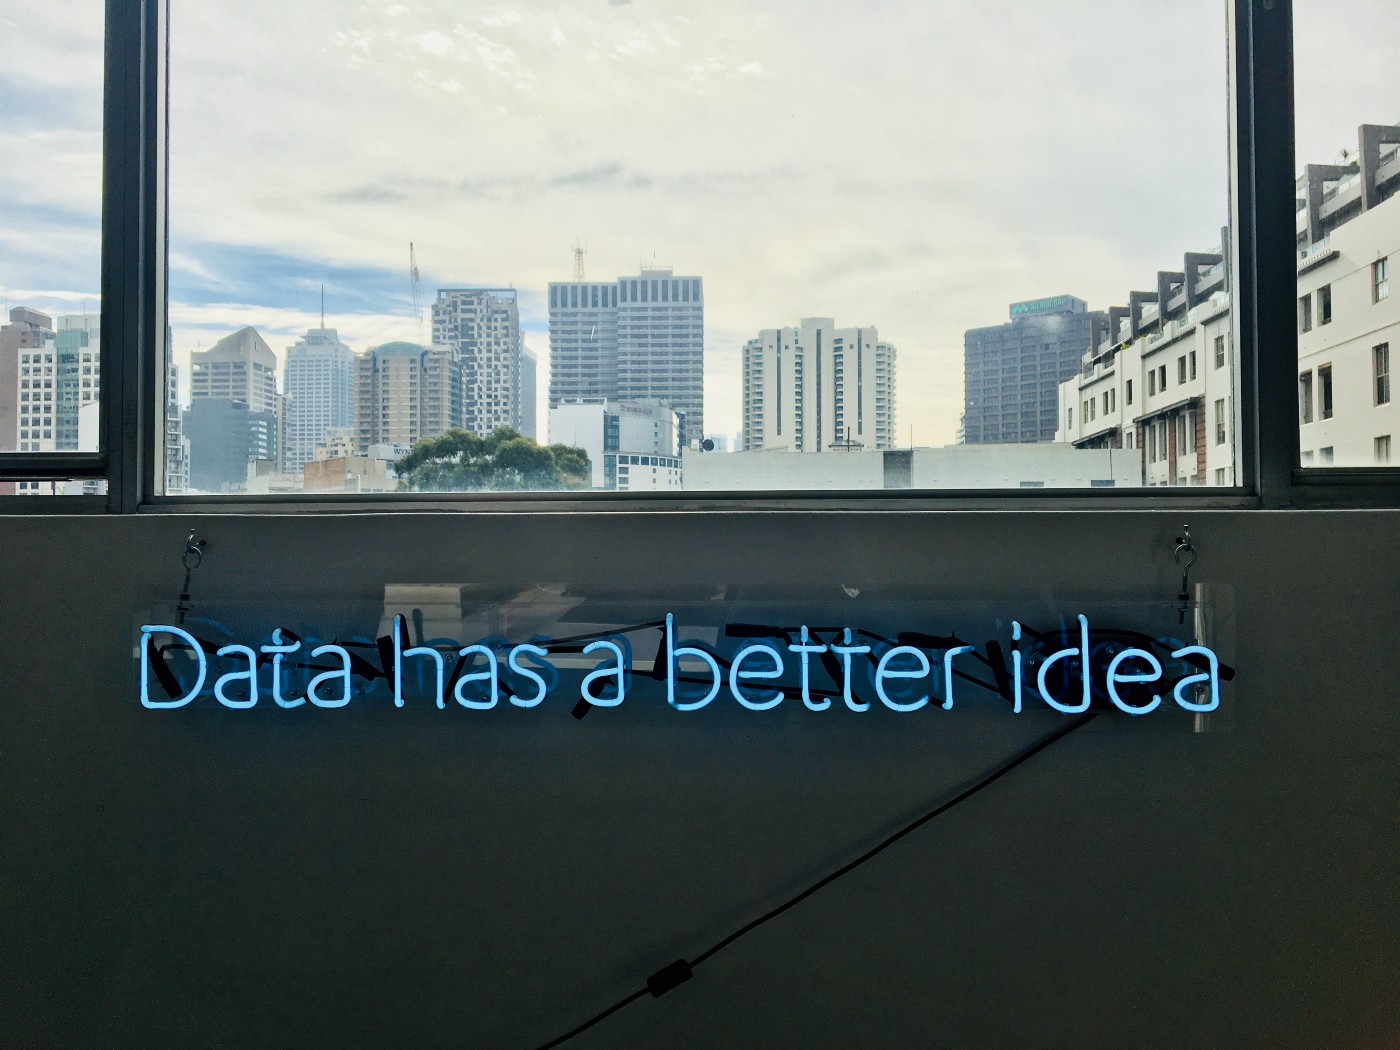 neon that says data has a better idea